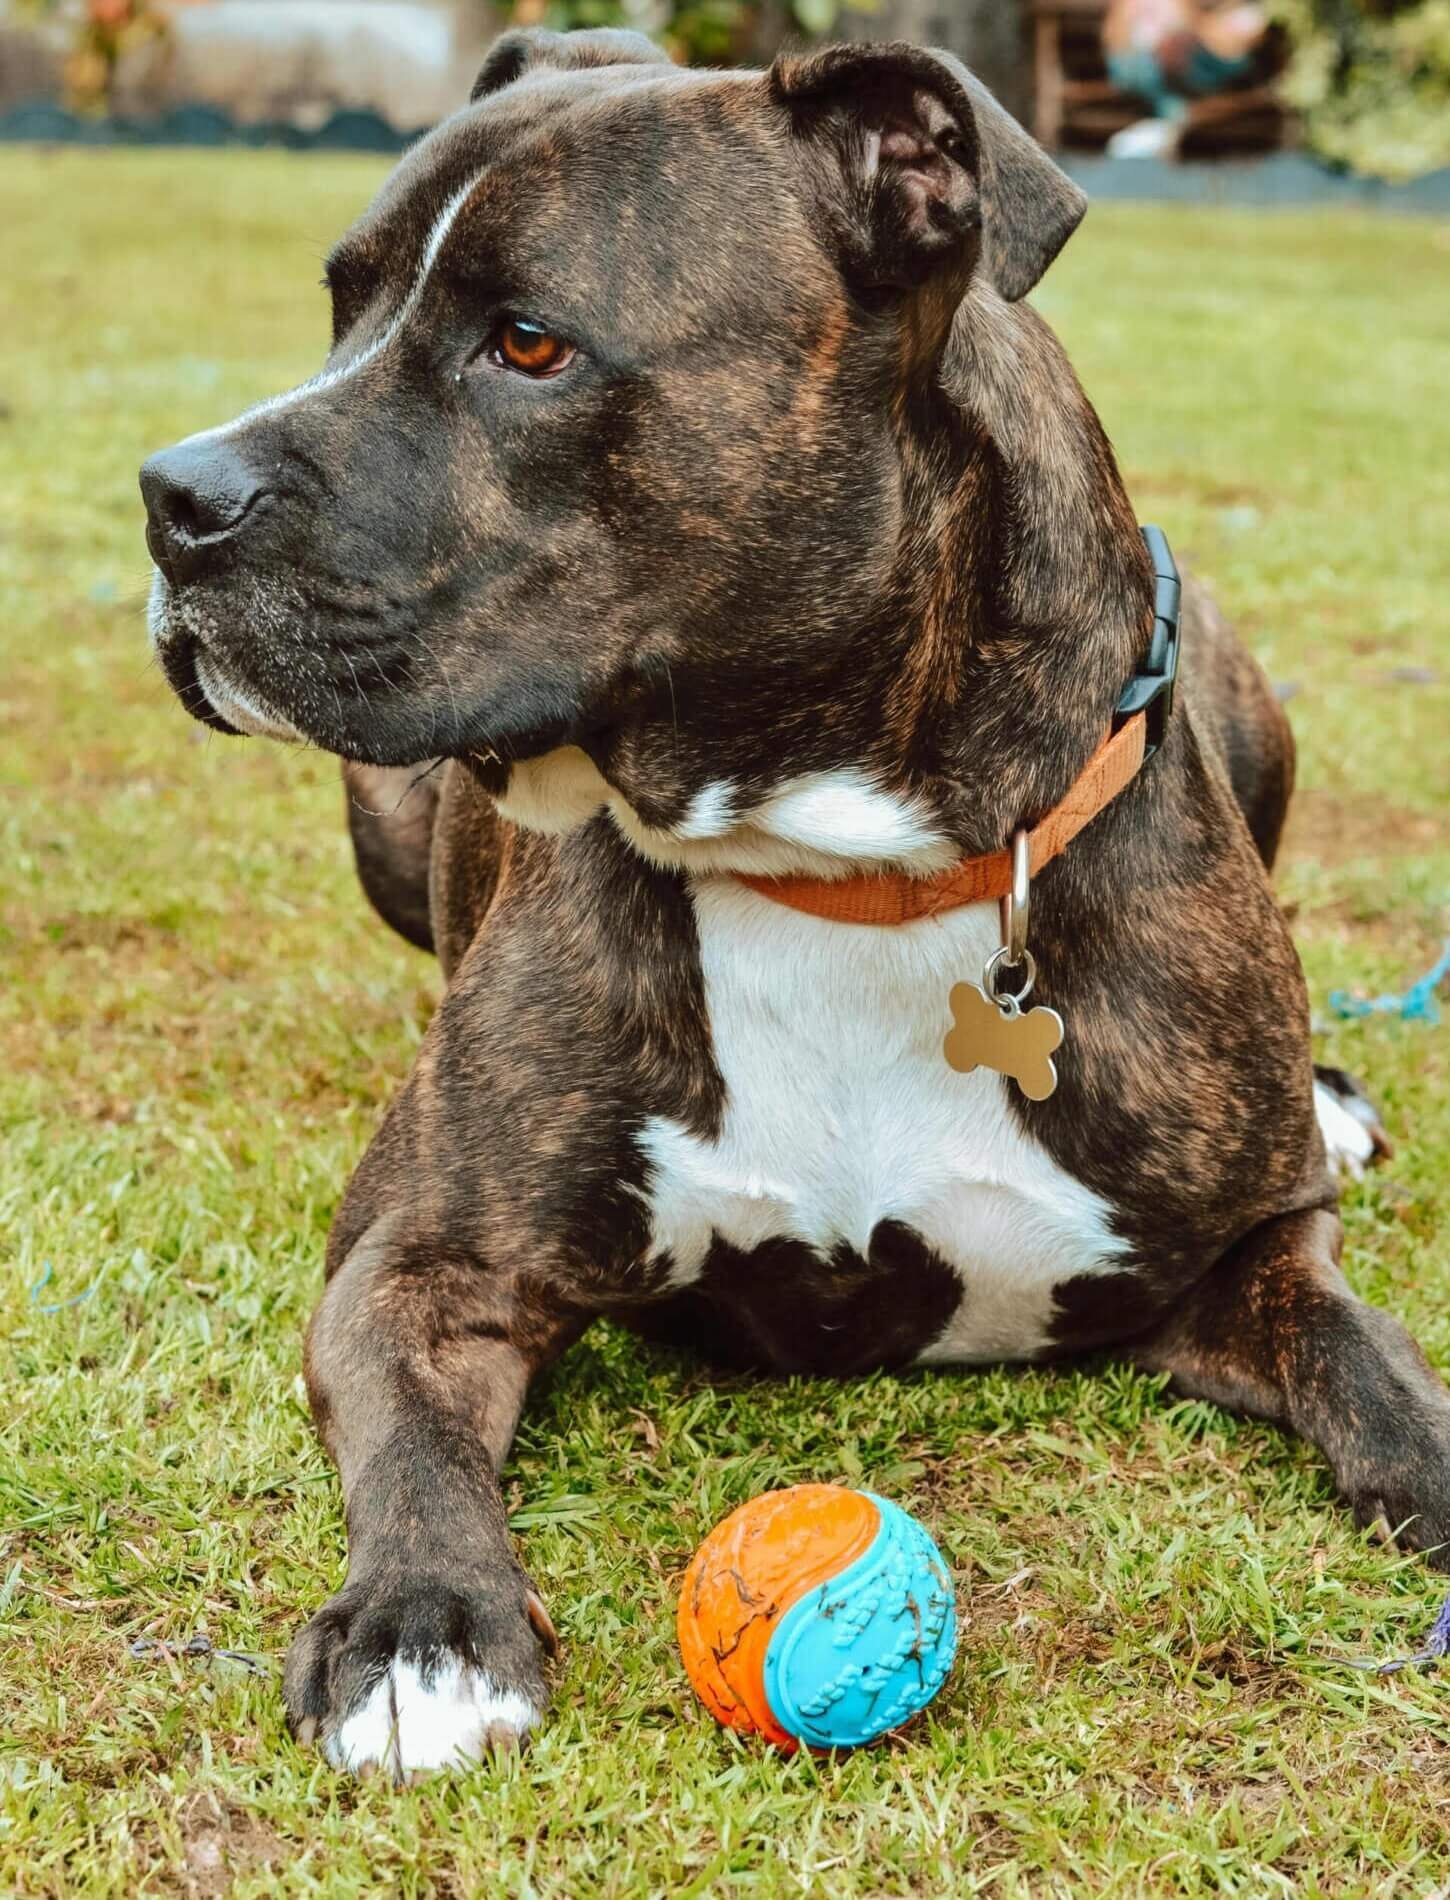 Scooby Doo Dog Ball is perfect for furry friends